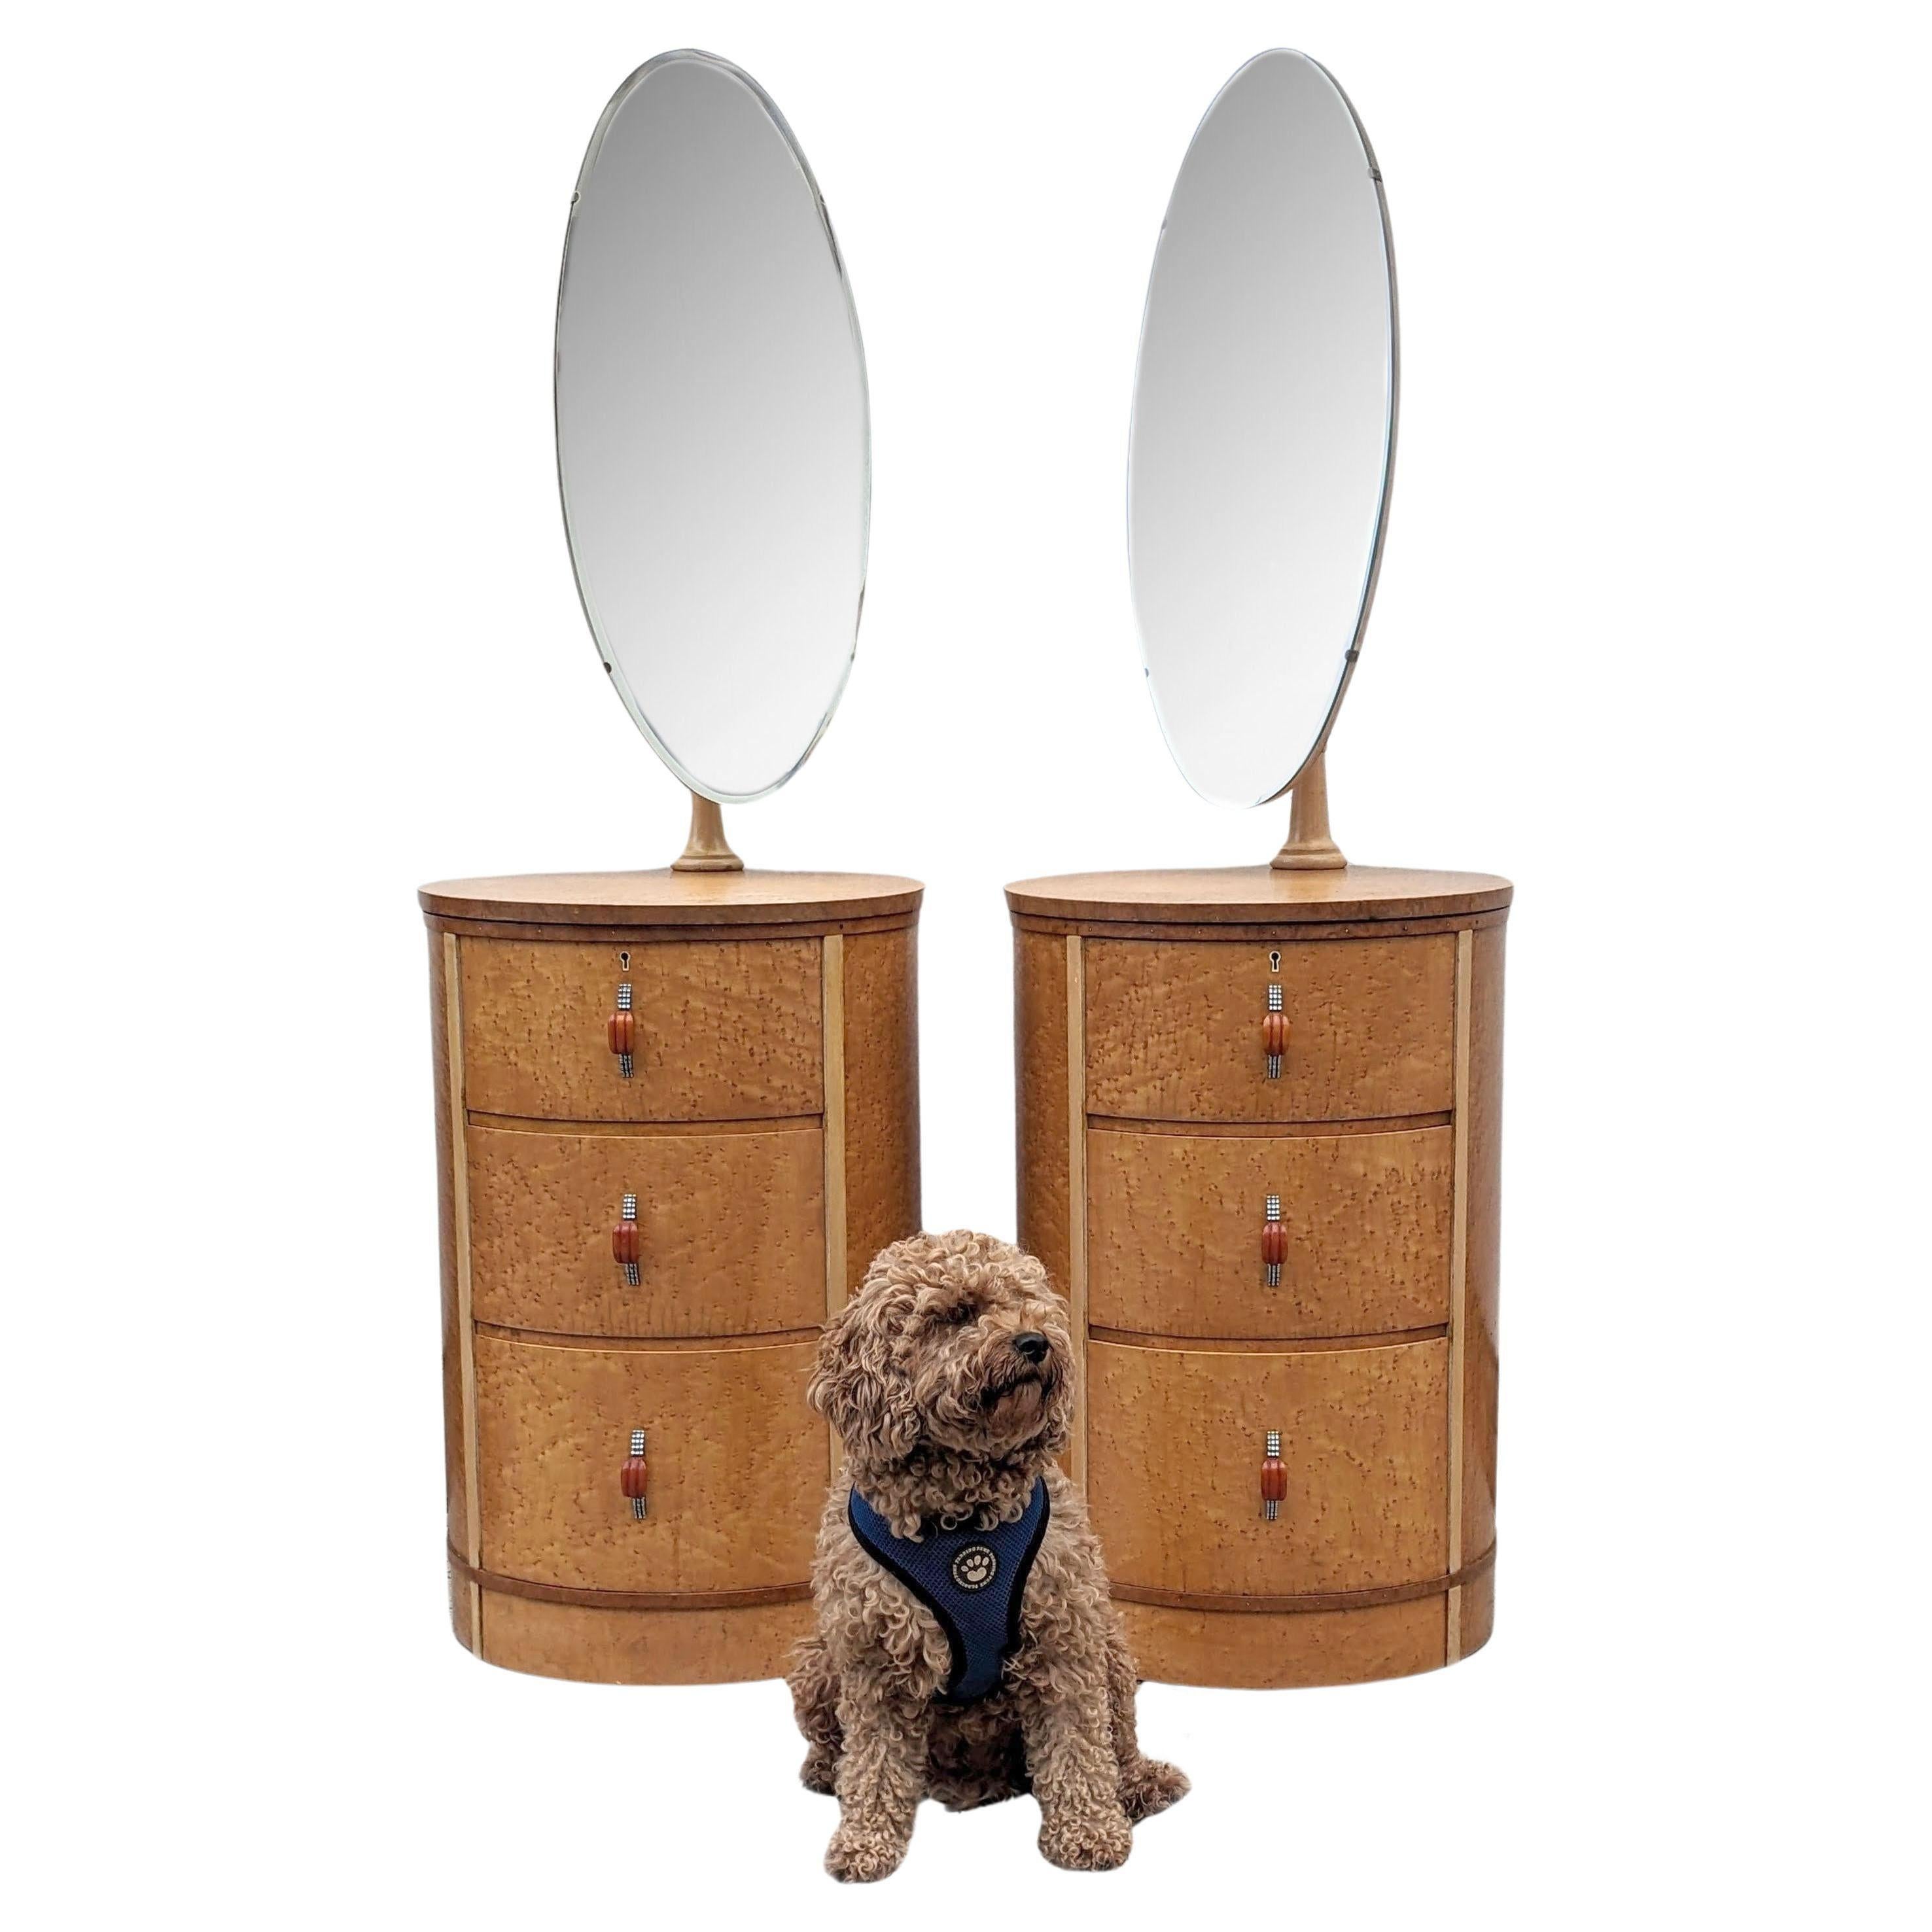 Art Deco Drum Shaped Maple Bedside Tables Night Stands With Mirrors, c1930 For Sale 1